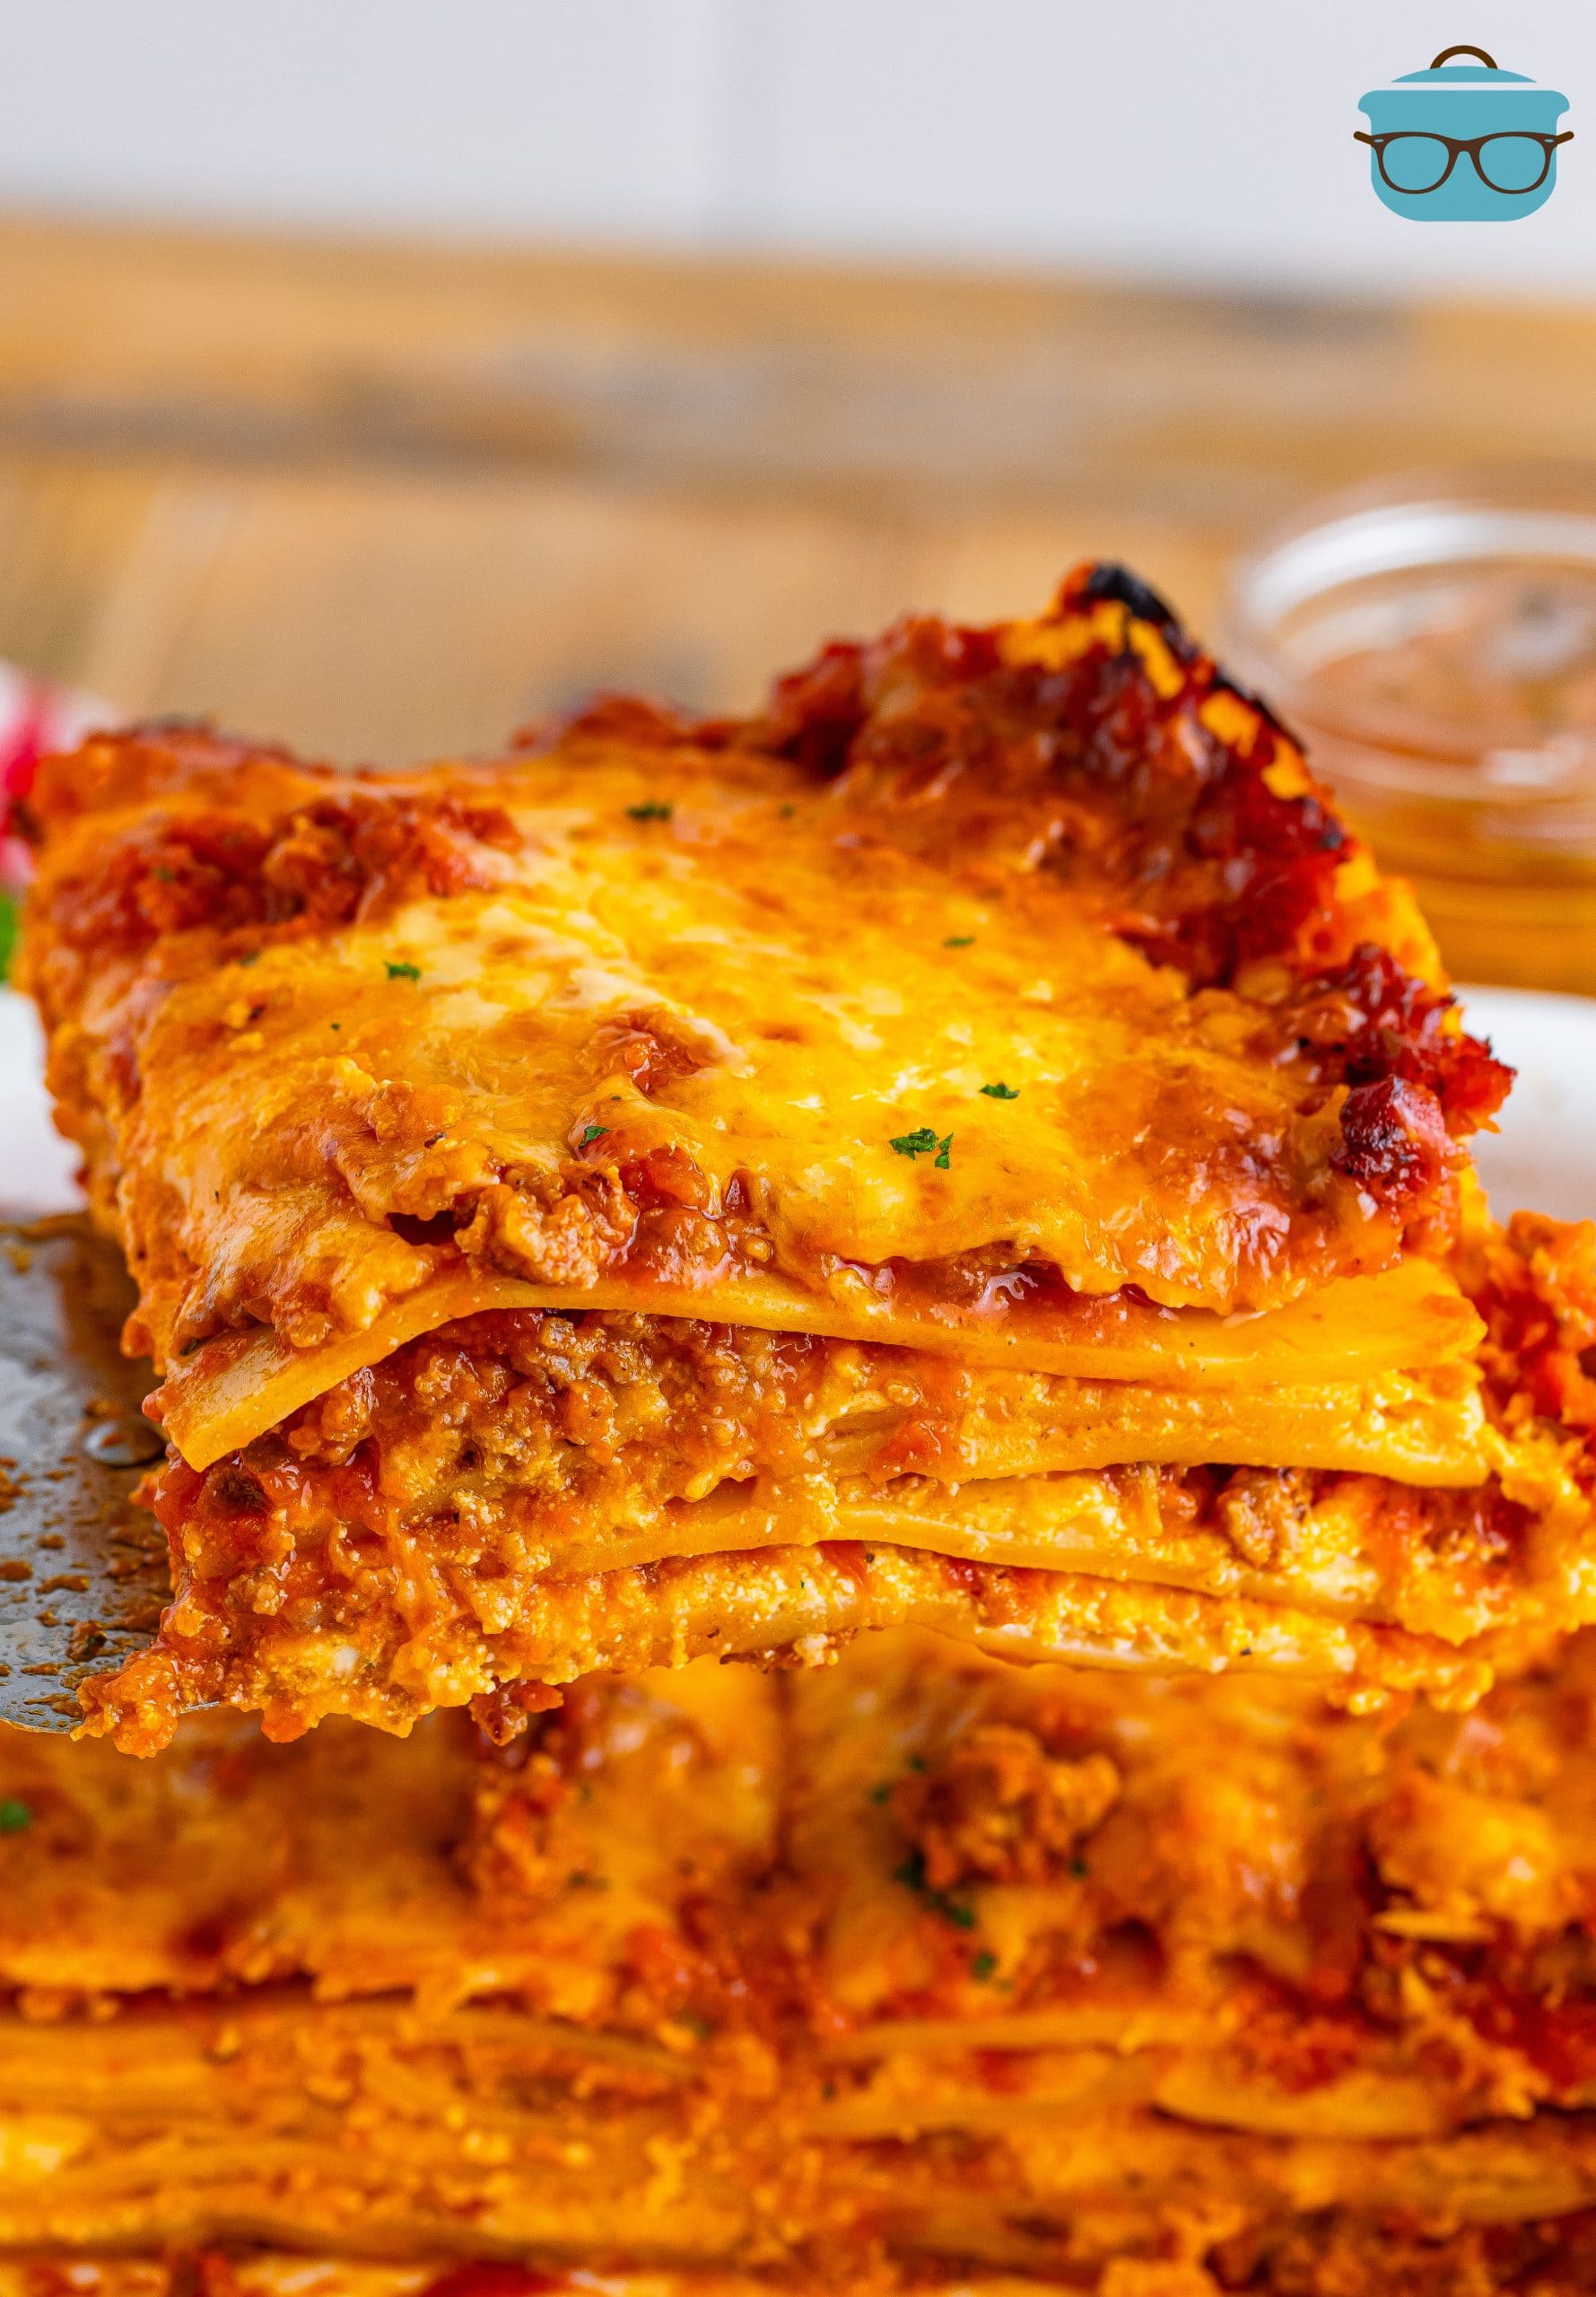 A serving of Lasagna above the rest.